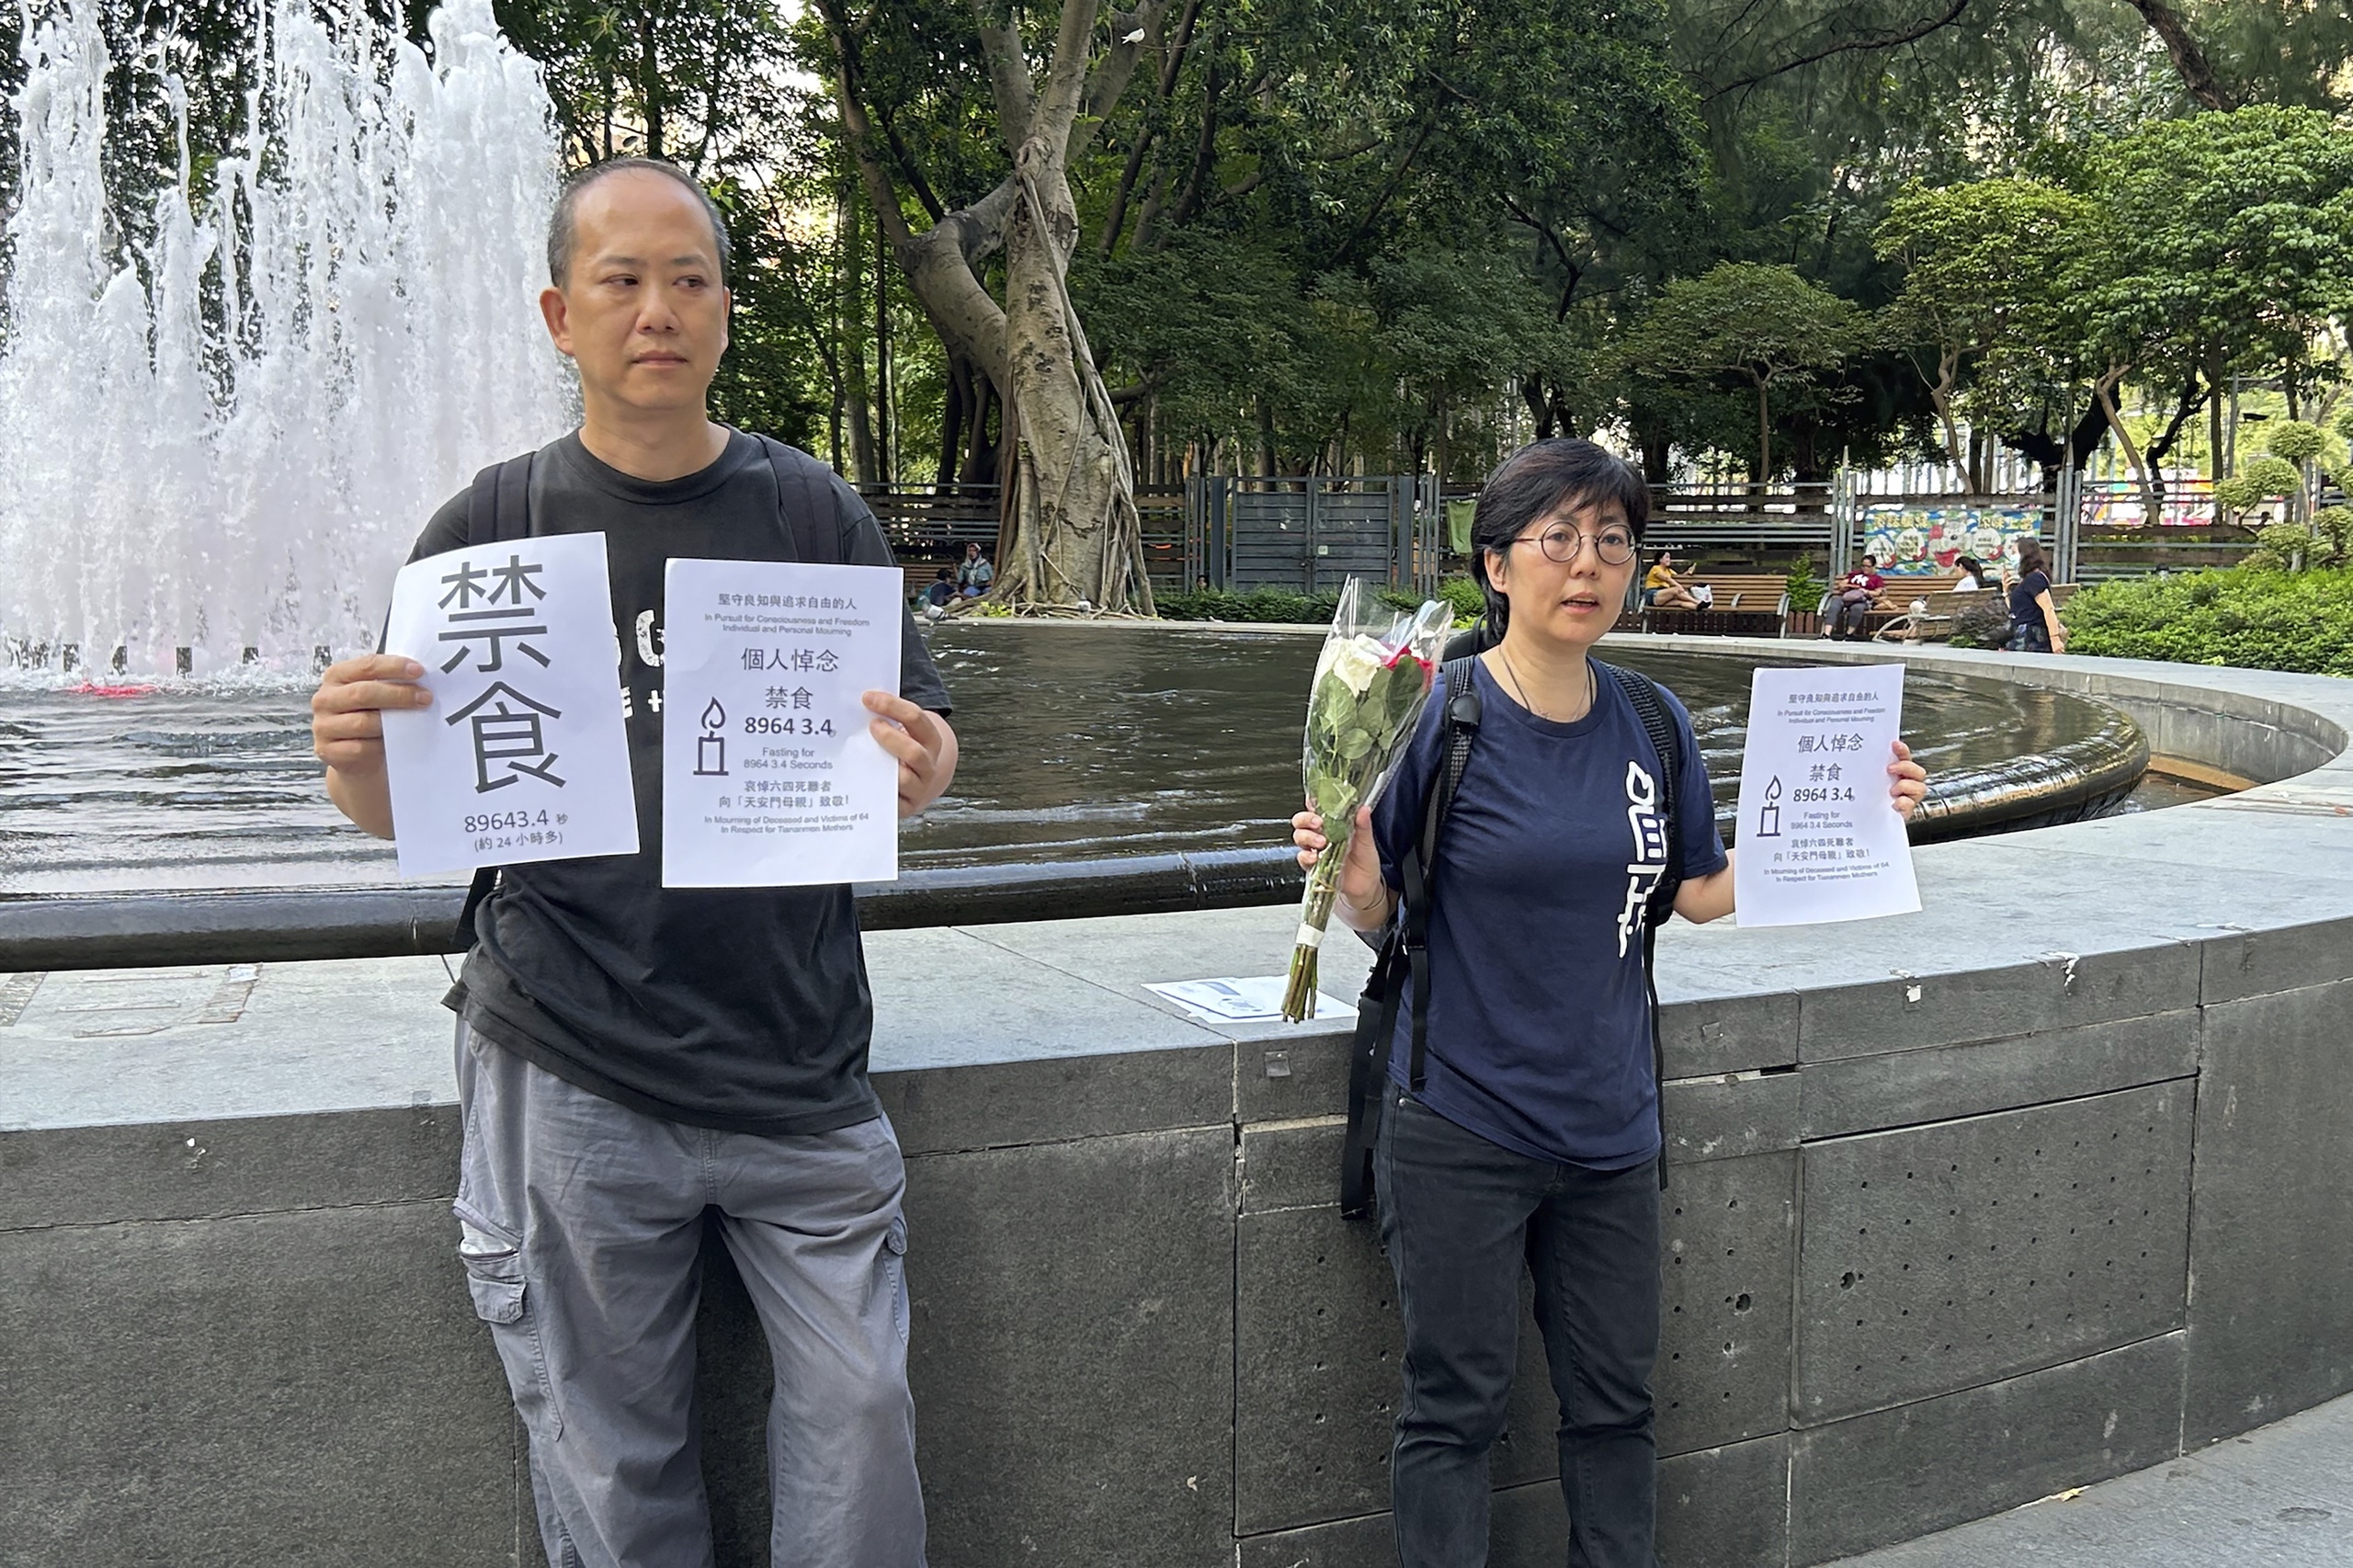 Tiananmen activists Kwan Chun-bang (L) and Lau Ka-yi (R) hold papers with the word fasting and they plan to fast for a day, marking the 34th anniversary of China's crackdown on Tiananmen Square.  The entrance to Hong Kong's Victoria Park as part of their memorial service on Saturday, June 3, 2023.  The couple was picked up by the police shortly after. 